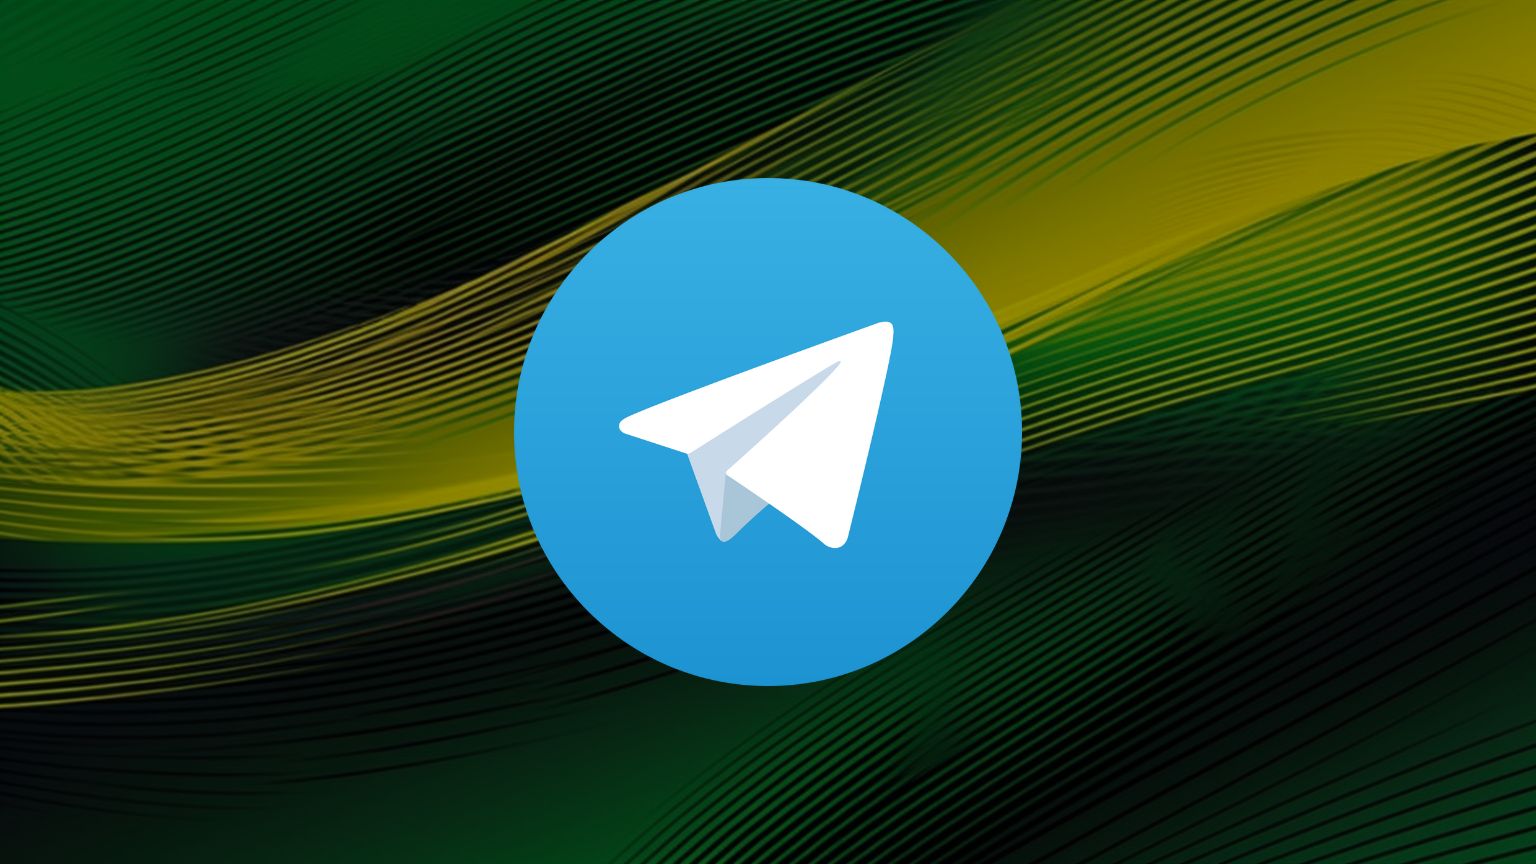 Telegram CEO tells Brazil’s government its censorship demands are “impossible”